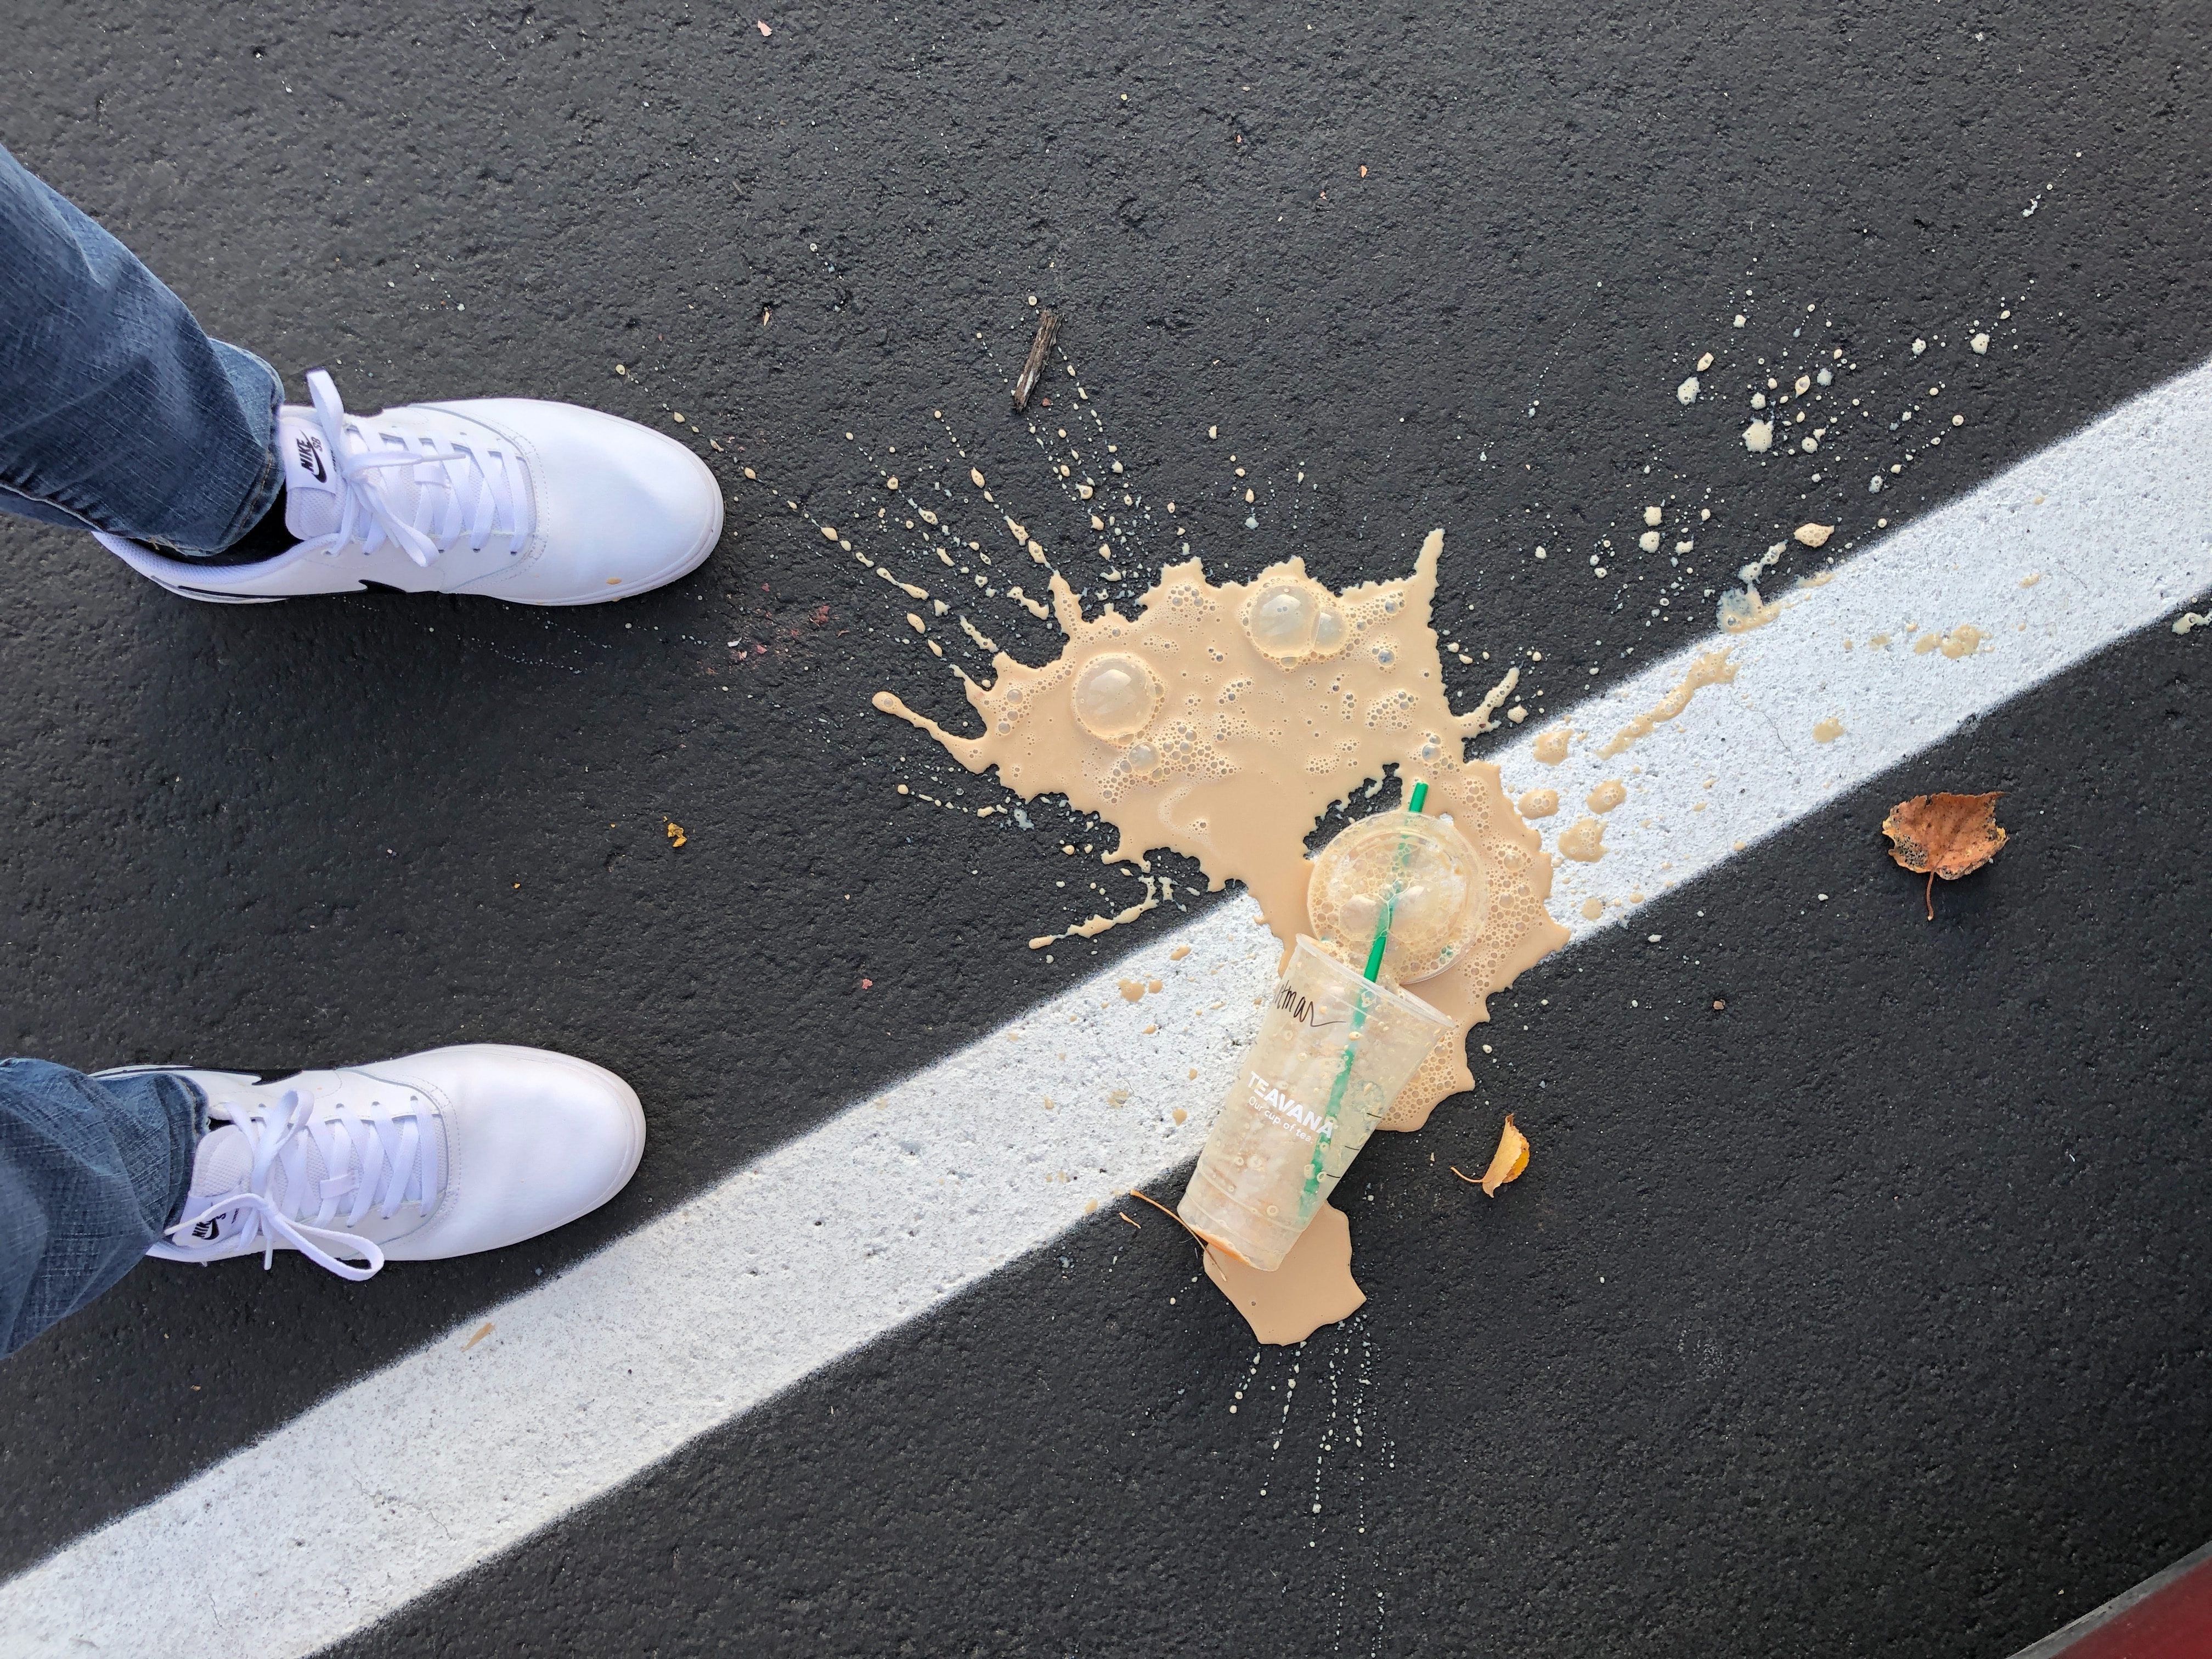 Coffee spilled on the ground in a parking lot by viewer's feet.